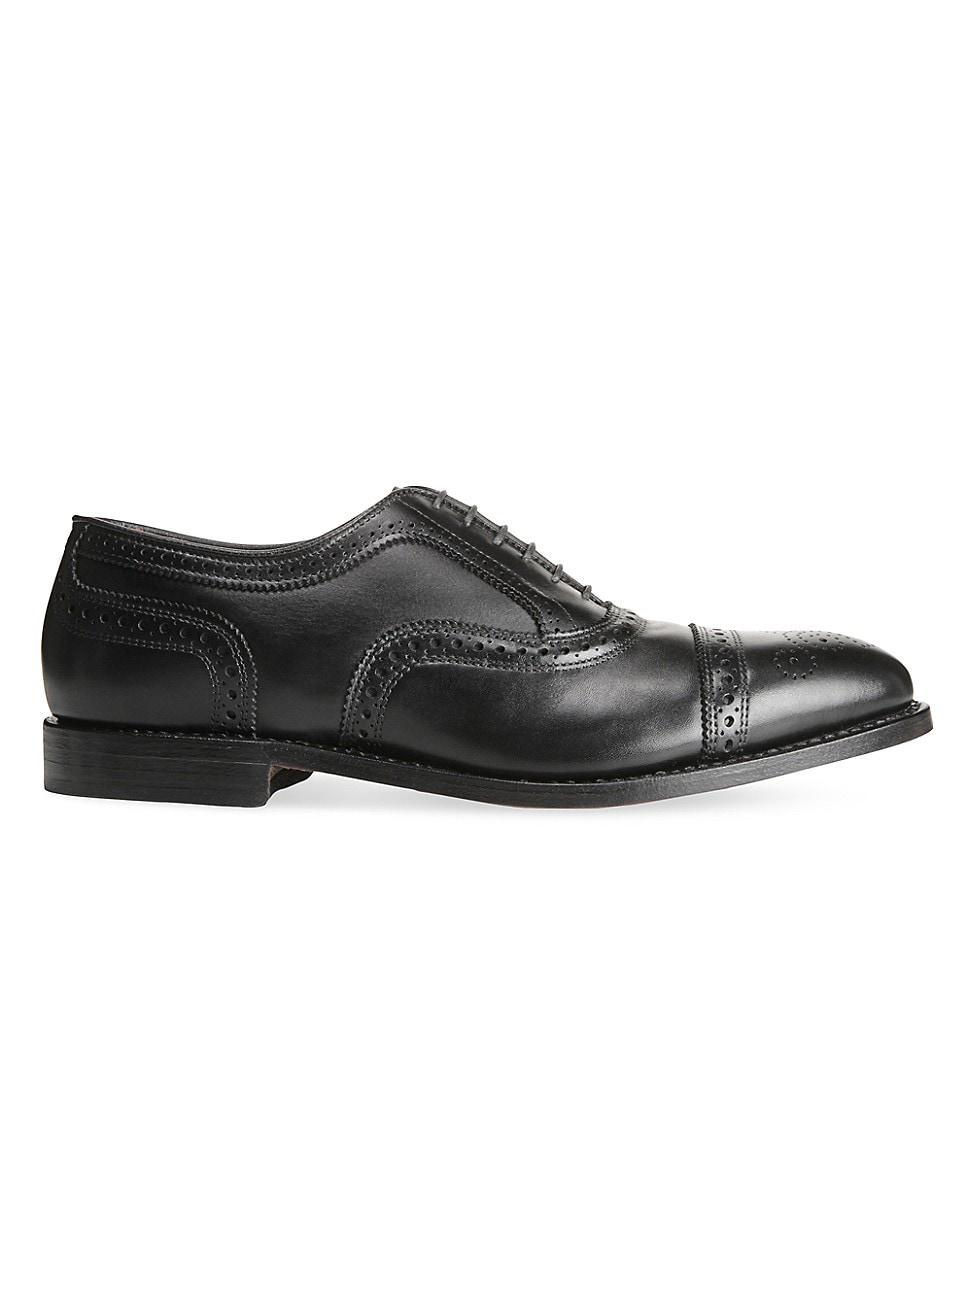 Mens Strand Leather Cap-Toe Oxfords Product Image